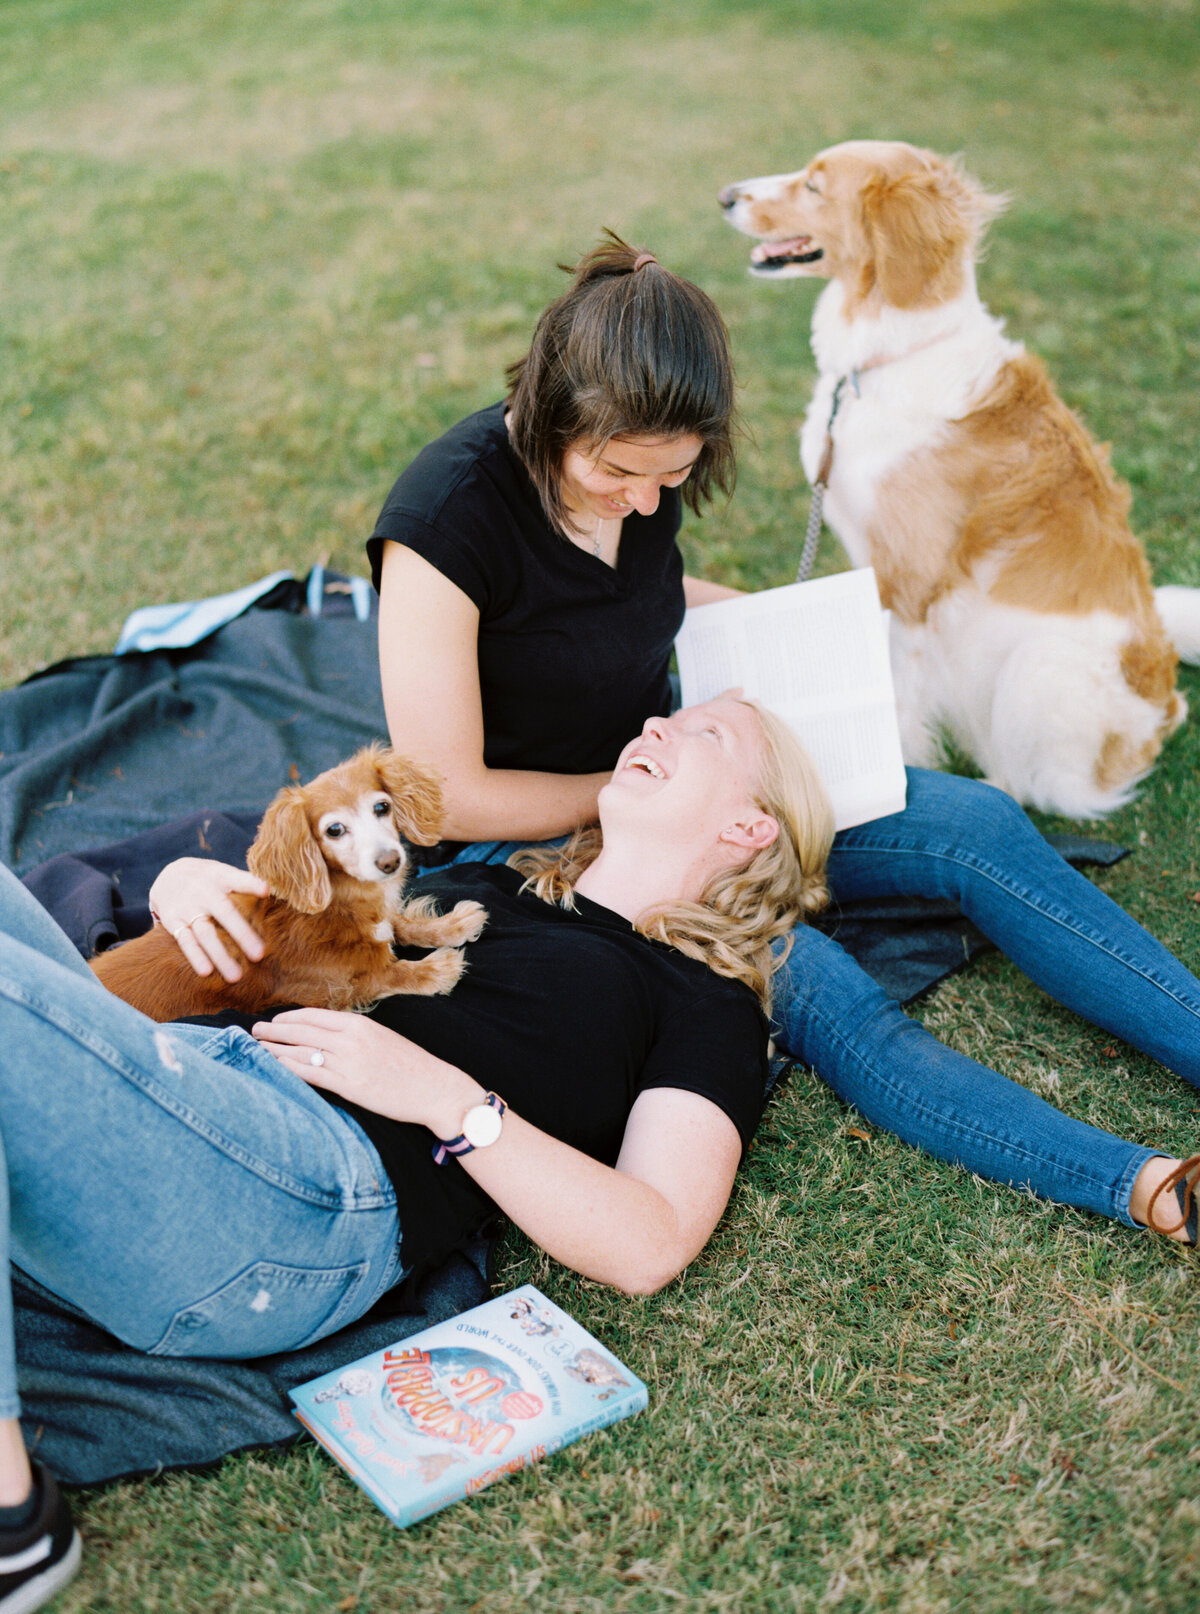 Lifestyle engagement photo session. These two brought their adorable pups to the park for engagement photos.